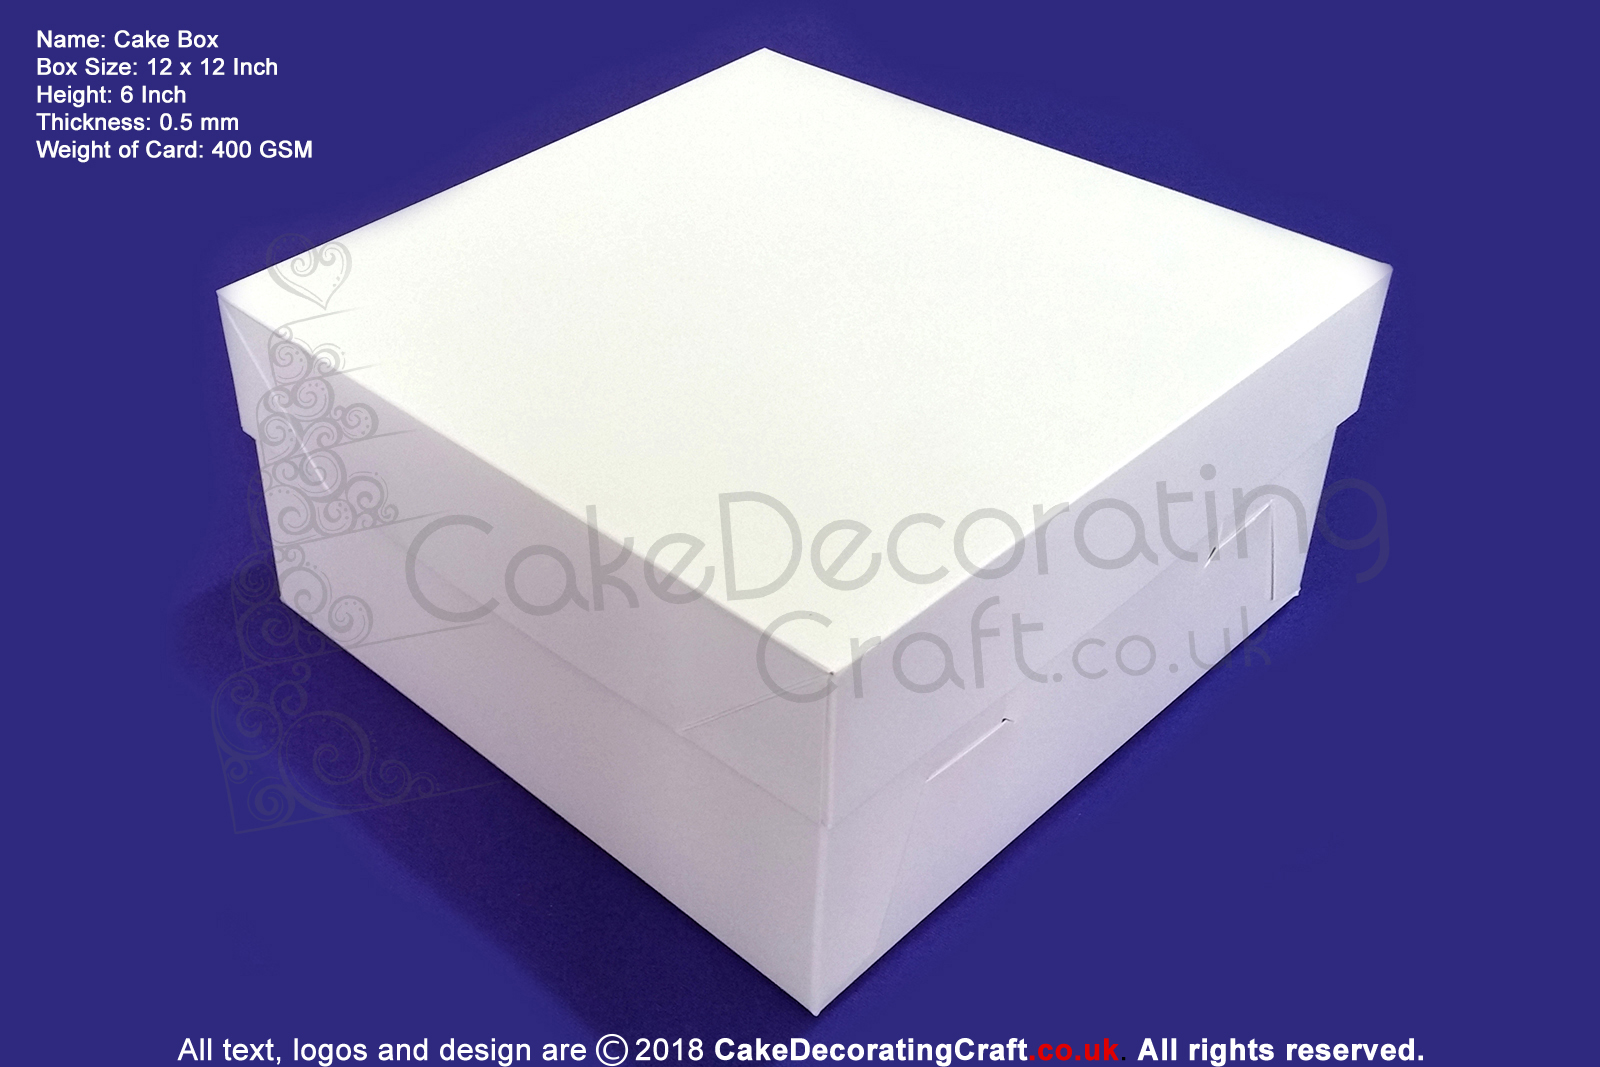 12" Inch | Cake Boxes + Lids | 0.5 mm Thick or 400 GSM | White | Strong | Premium Quality